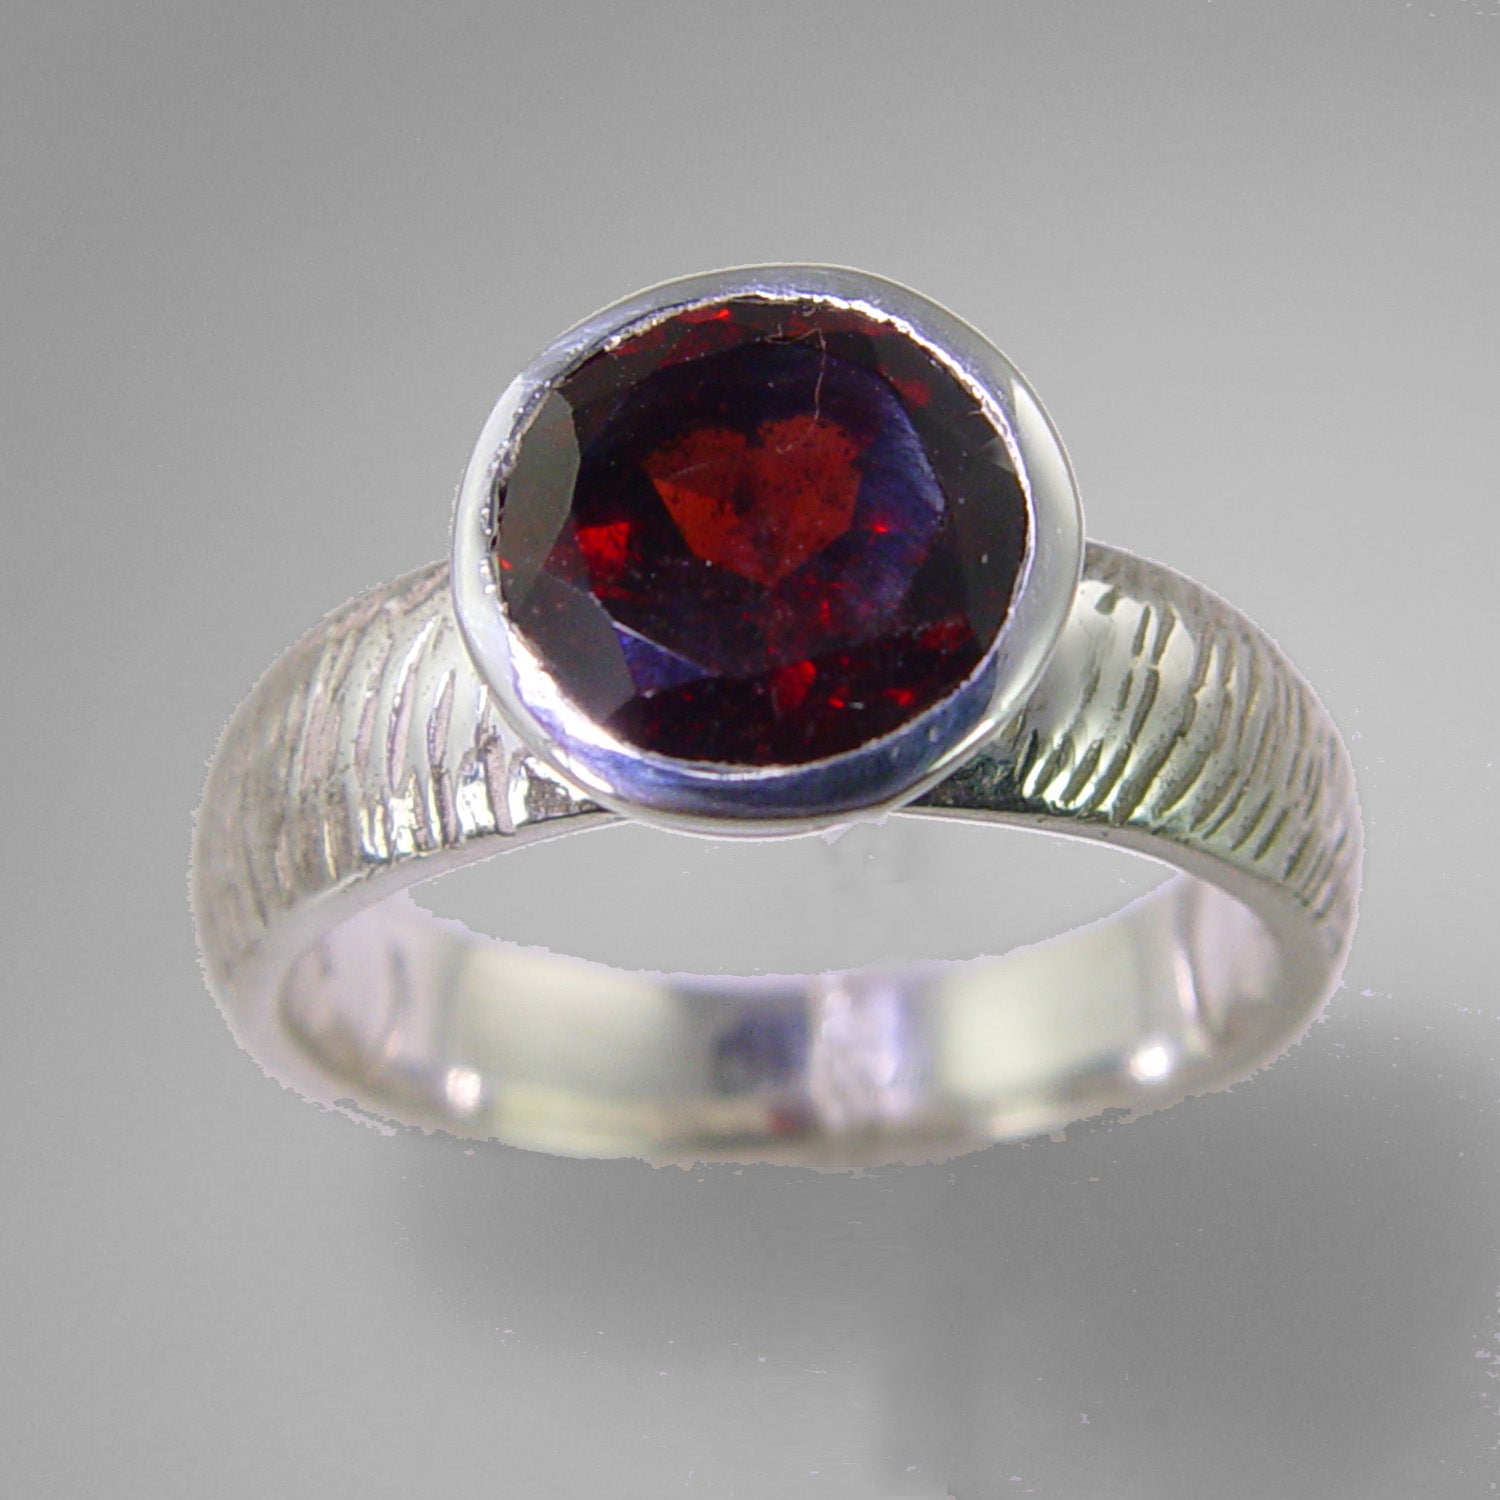 Garnet 5.56 ct Round Sterling Silver Ring, Size 8